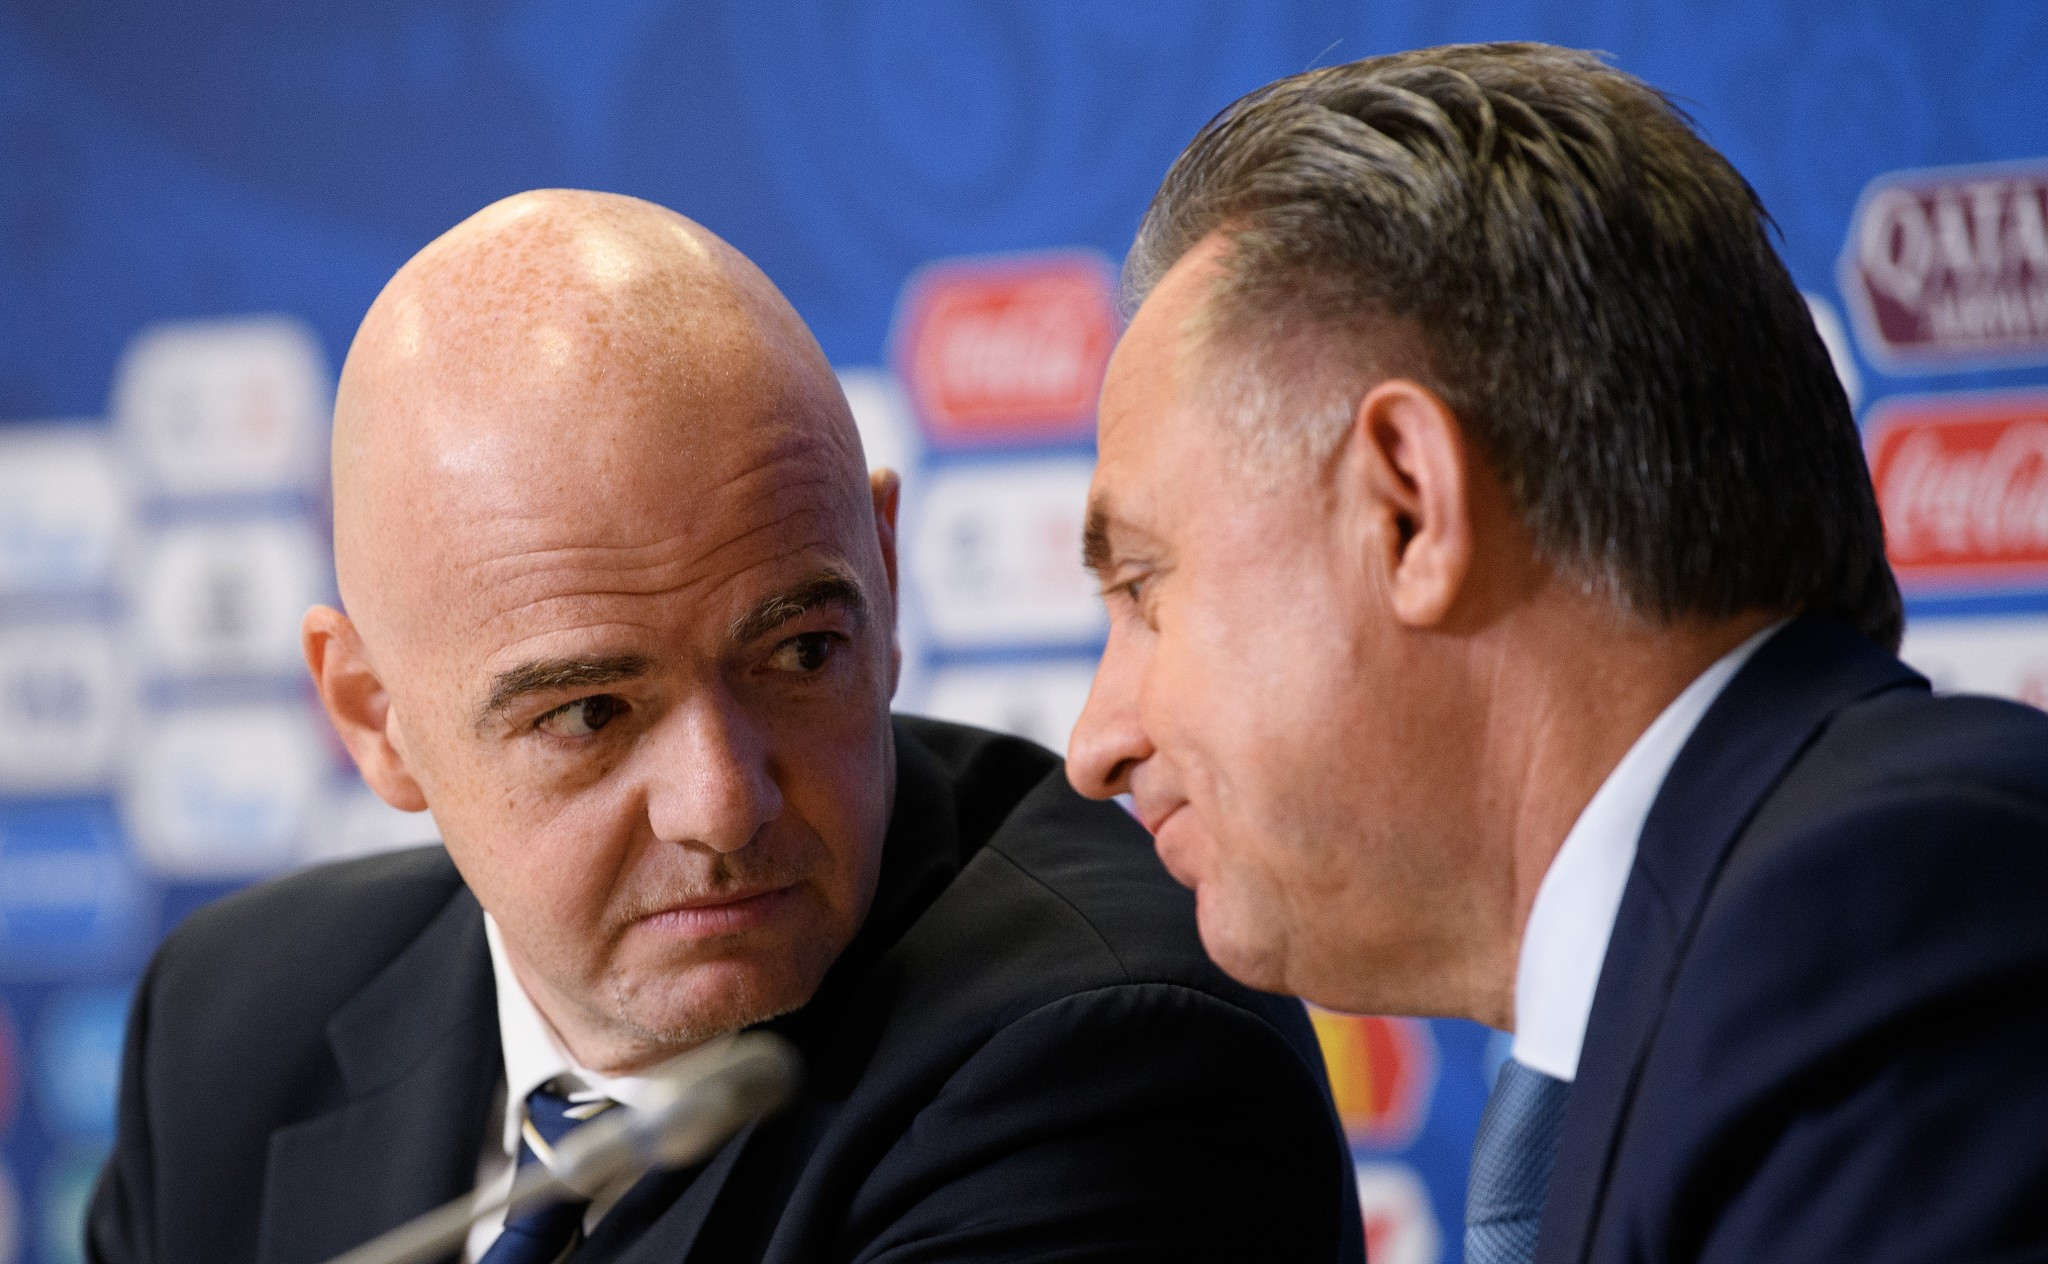 FIFA President Gianni Infantino, left, attempted to block a decision to prevent  Vitaly Mutko, right, from standing for re-election to the Council because he was part of the Russian Government ©Getty Images